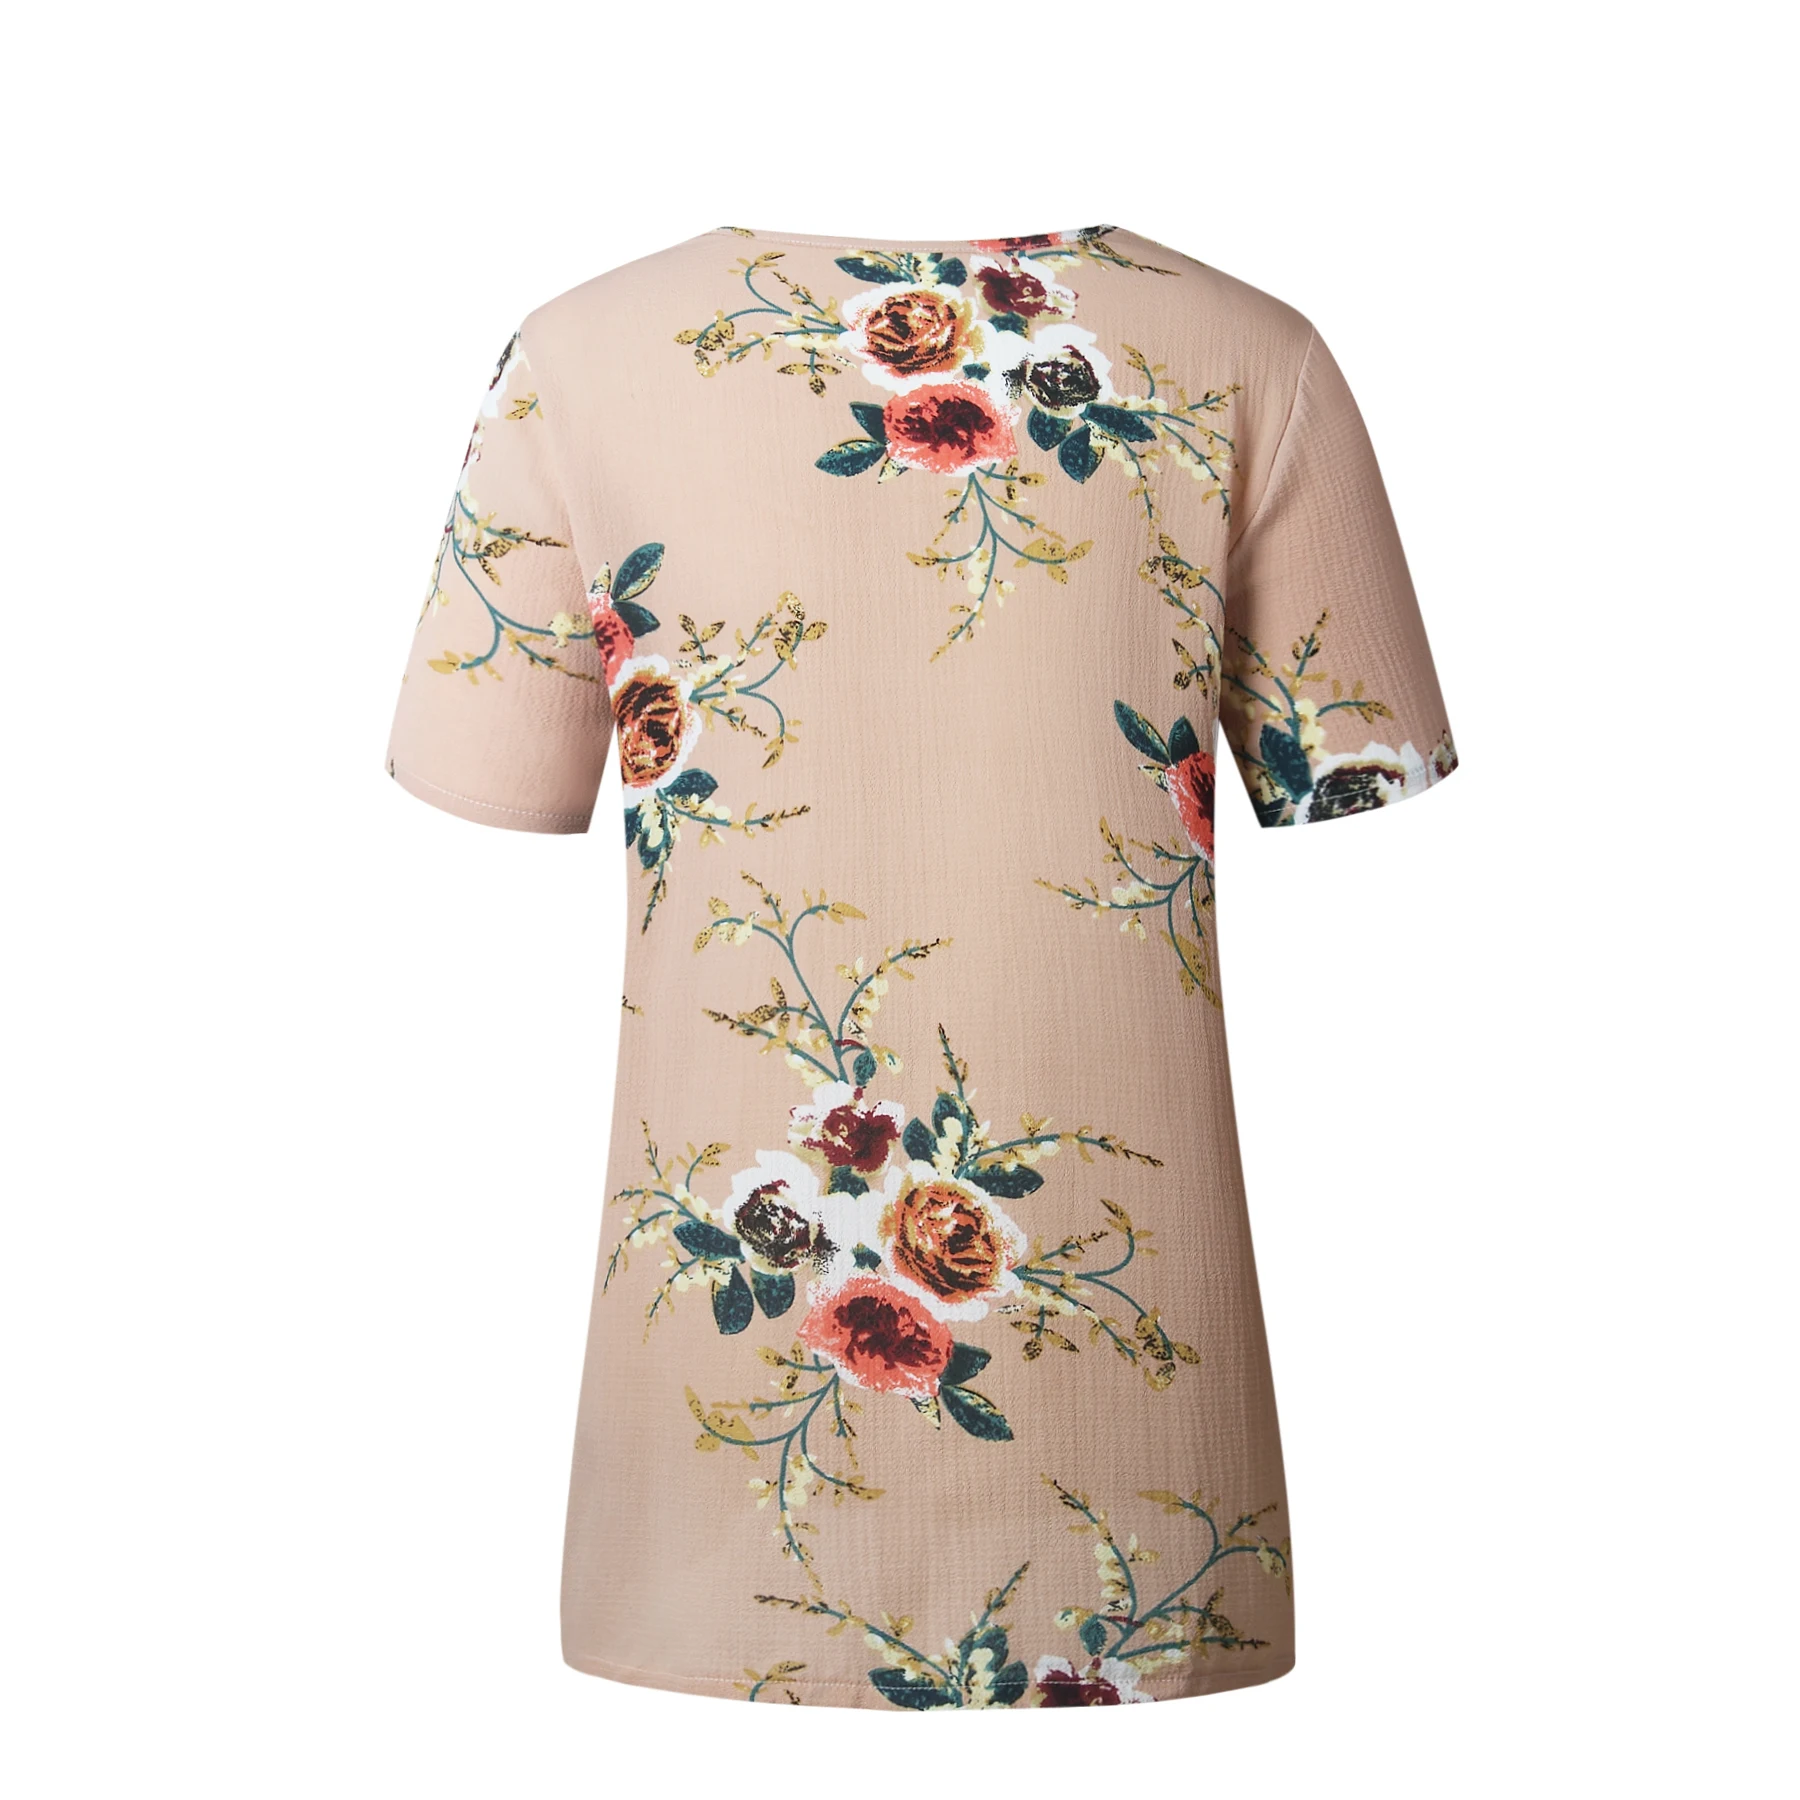 Floral Short Sleeve Ladies Chiffon Loose Casual Tops Round Neck (Us 6-16W)